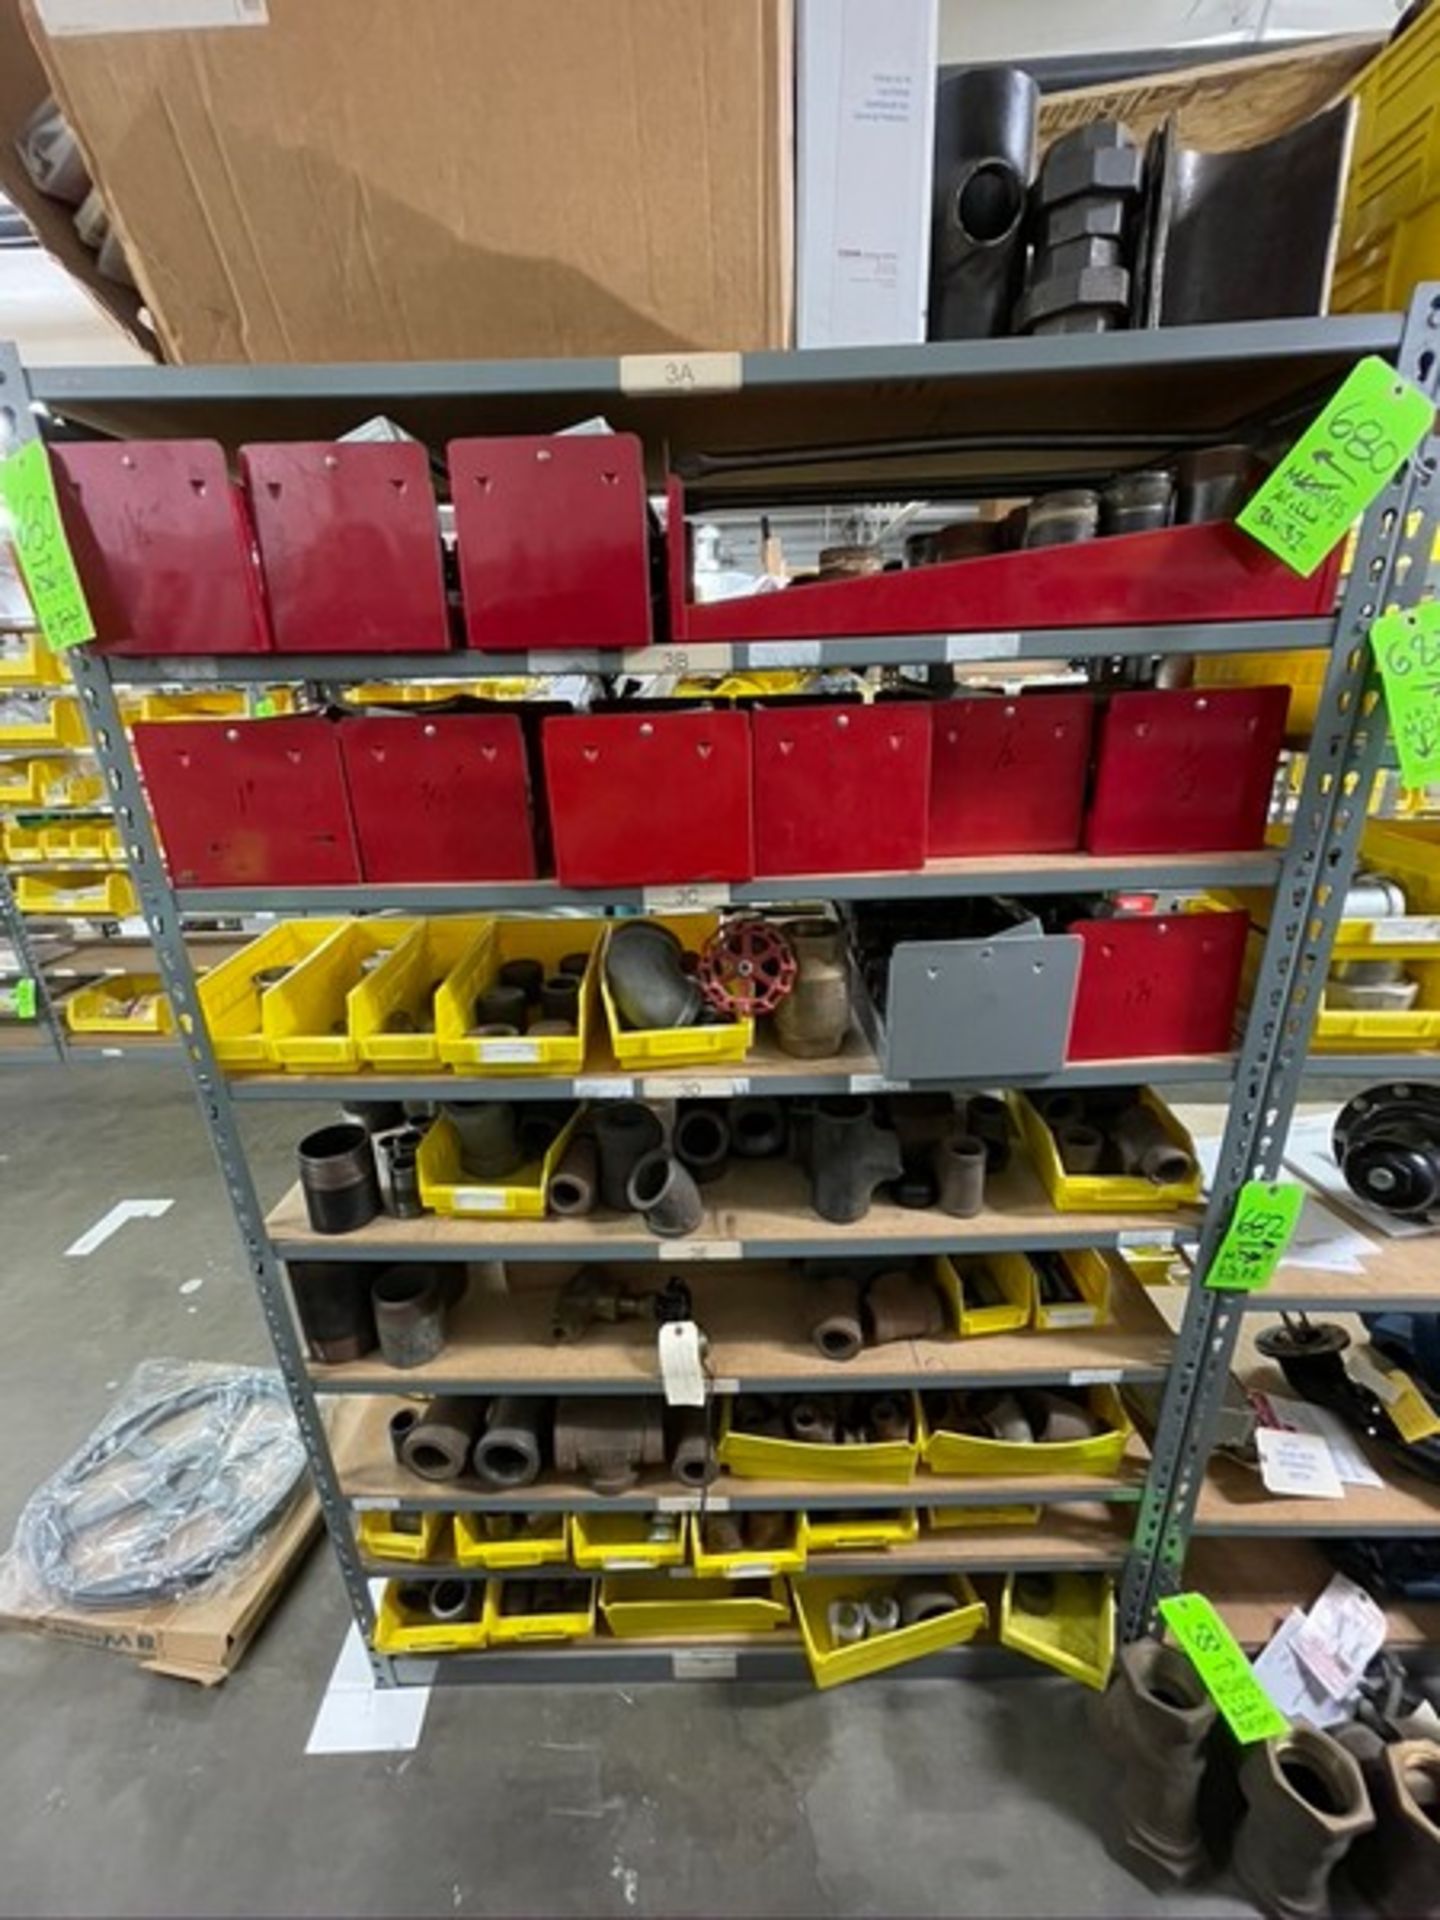 CONTENTS OF SHELVES, ASSORTED PLUMBING FITTING AND HARDWARE (SECTIONS "3A - 3I") (RIGGING, SITE